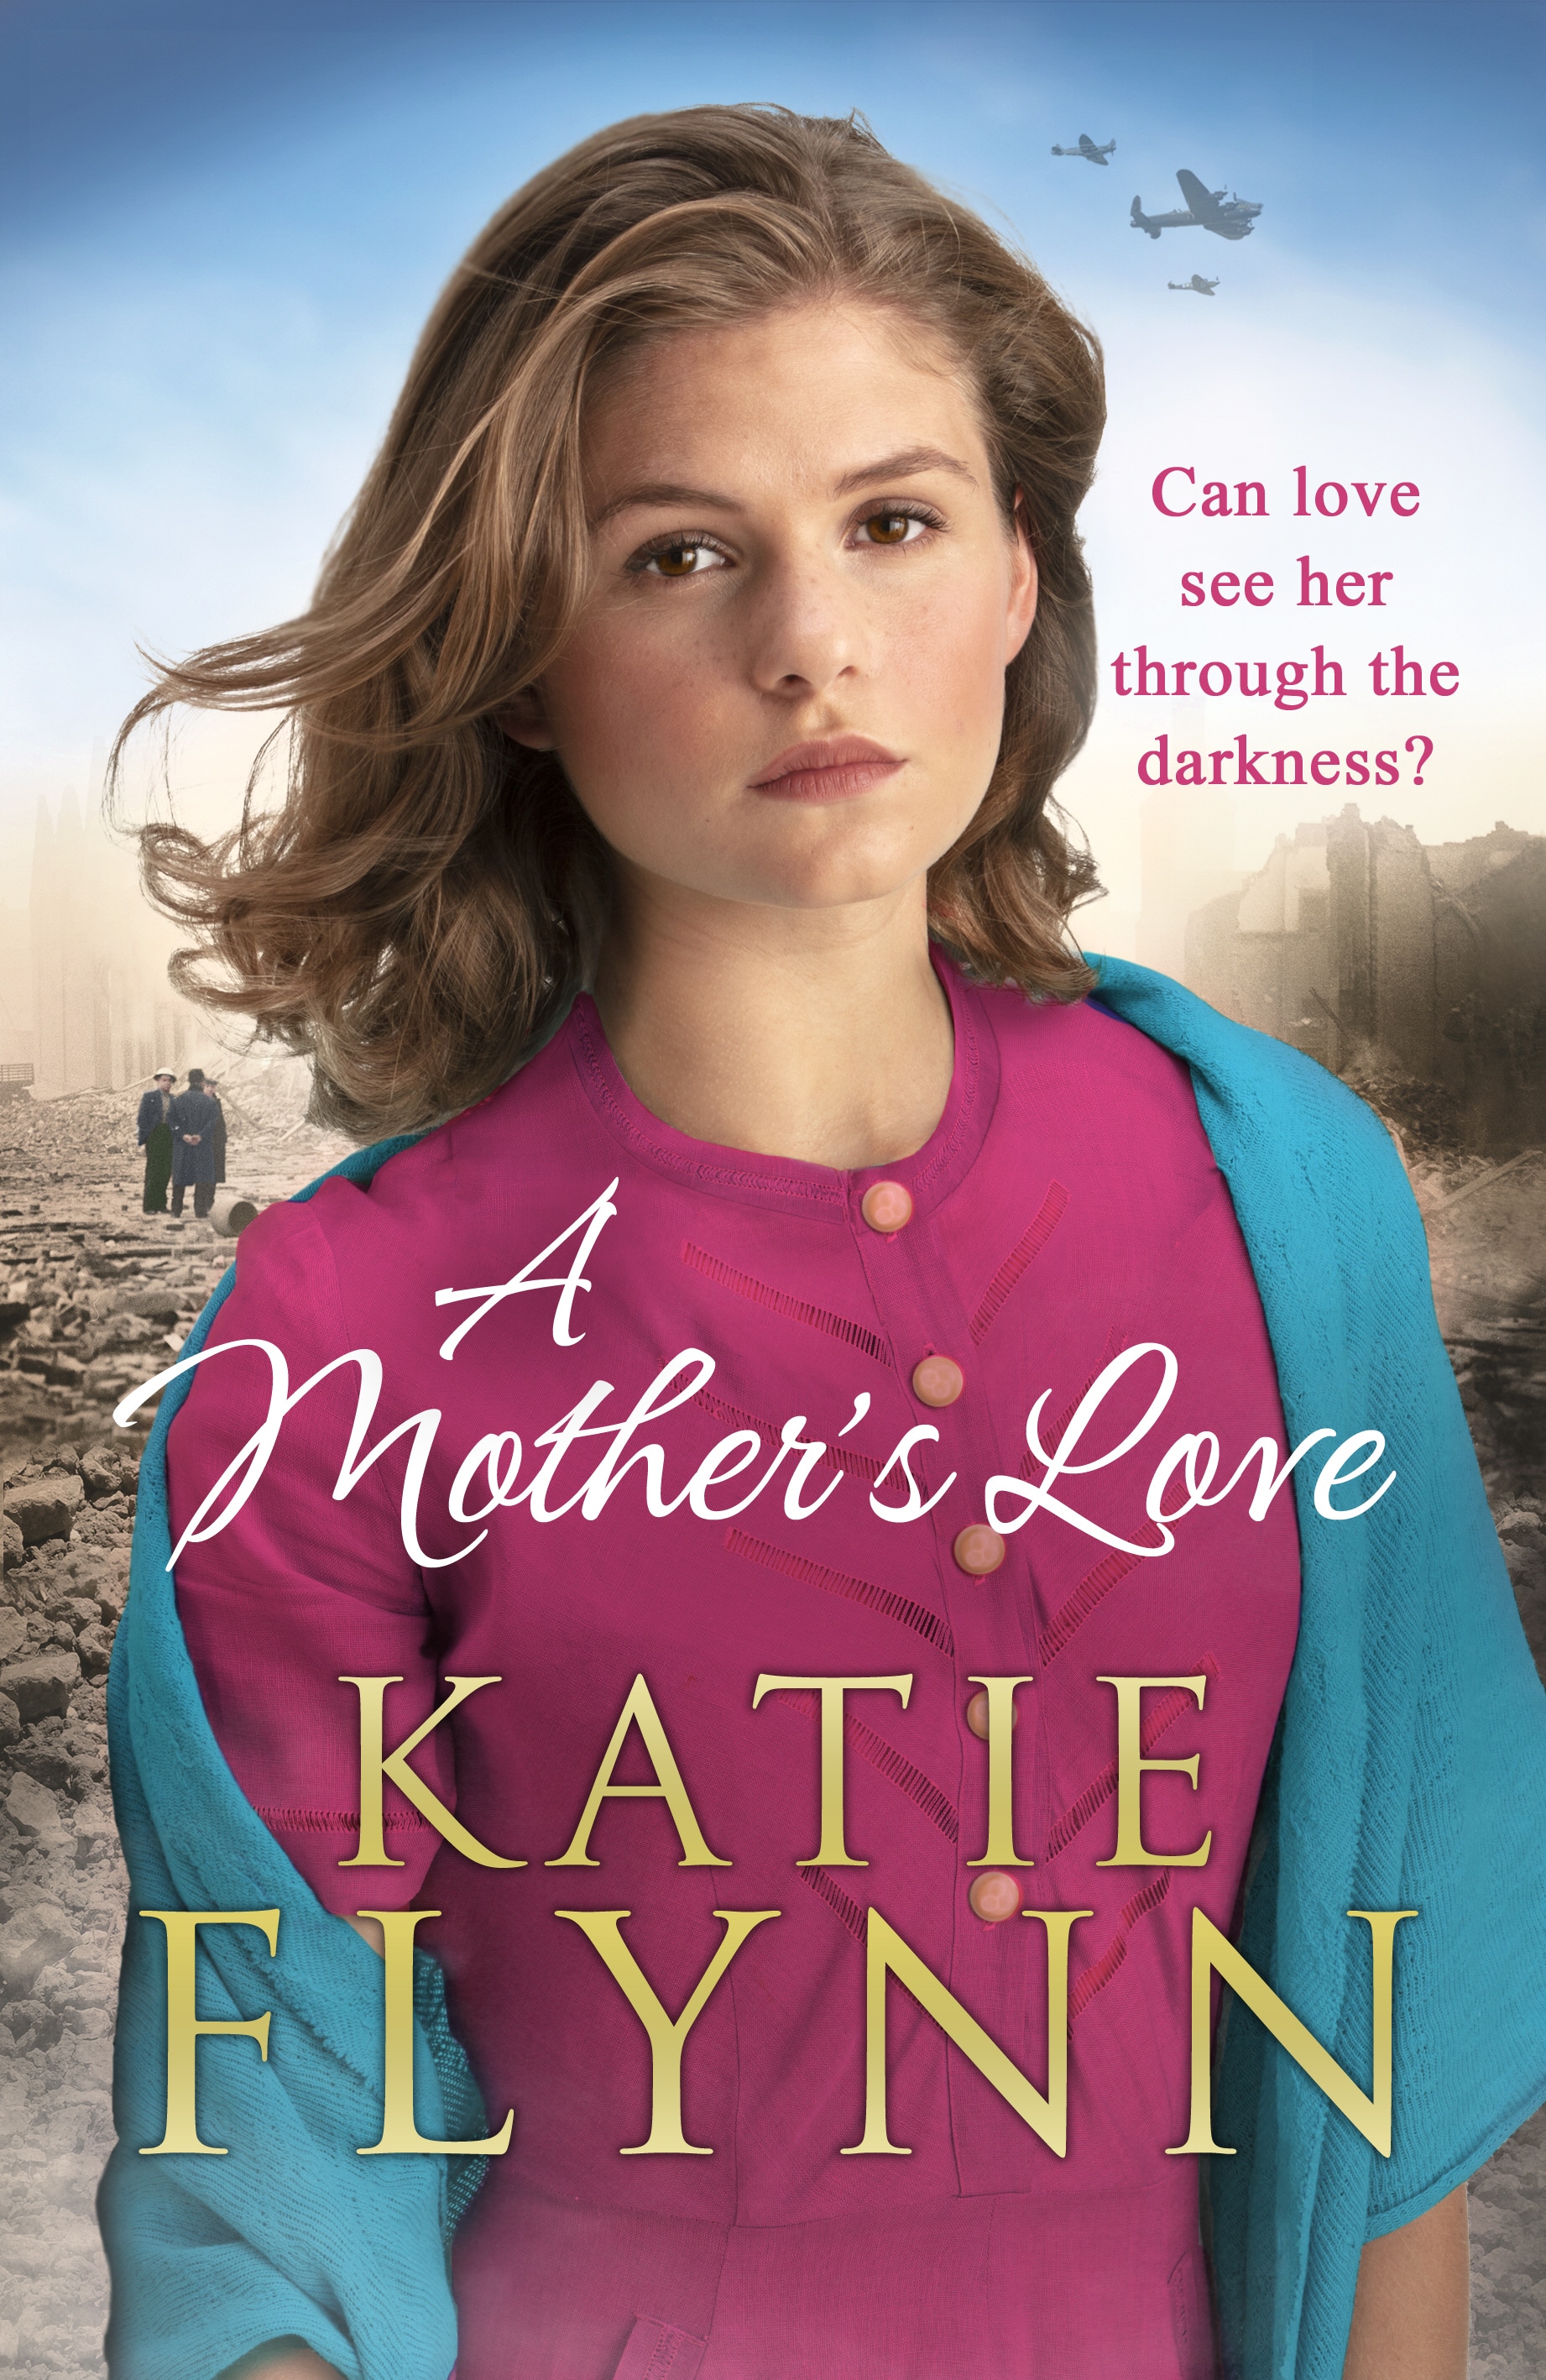 Book “A Mother’s Love” by Katie Flynn — March 21, 2019